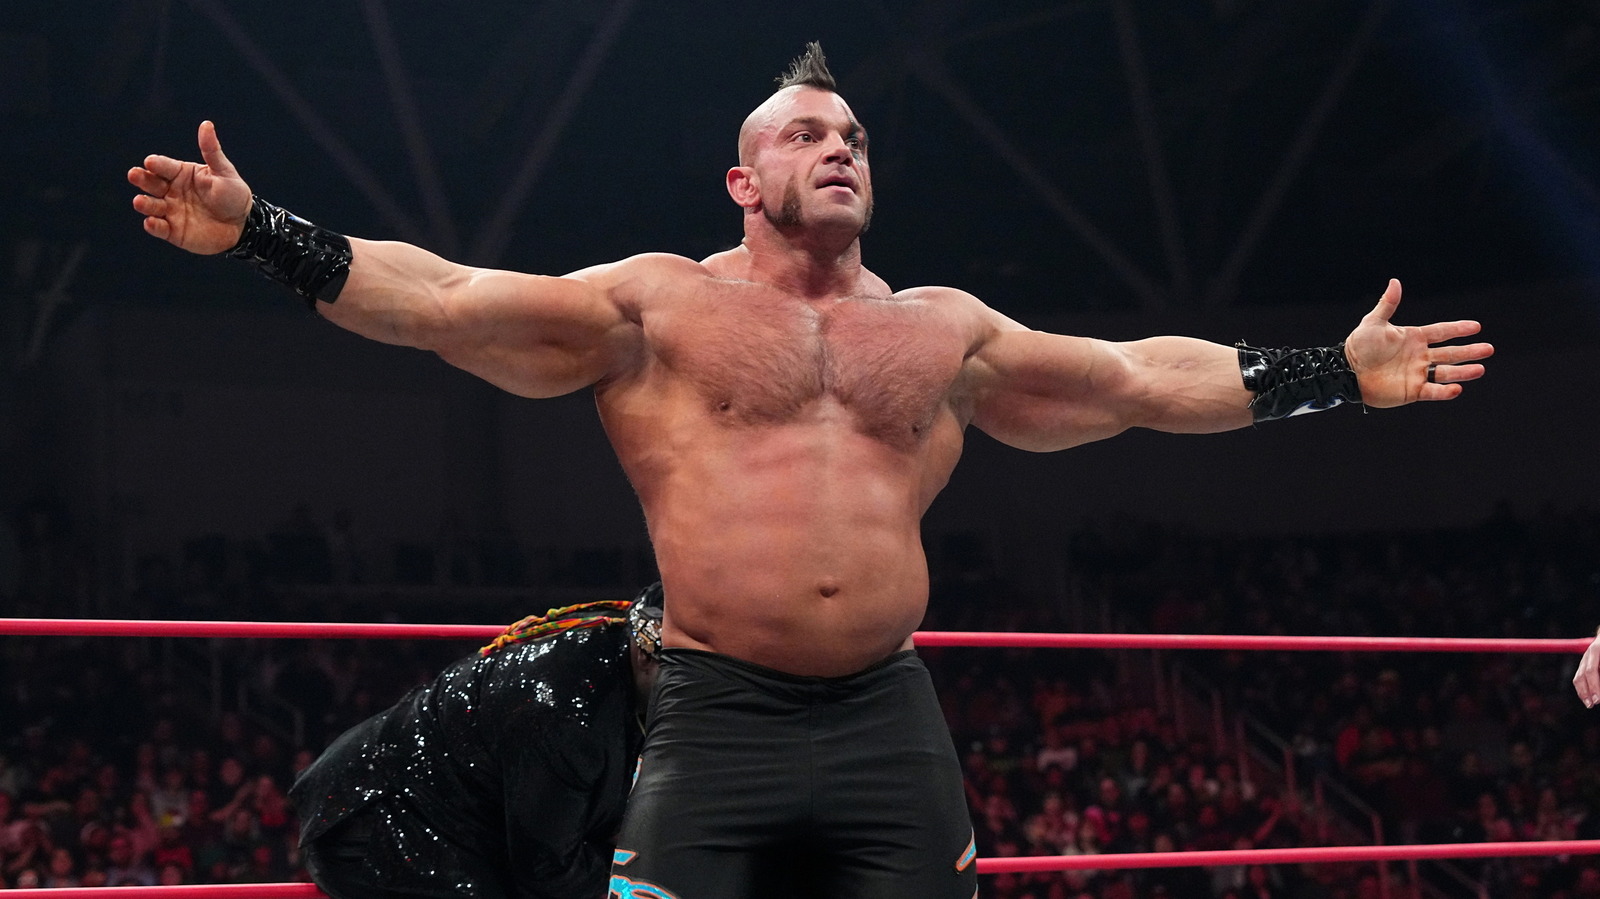 Backstage Details On Injury With Which AEW's Brian Cage Is Currently Working